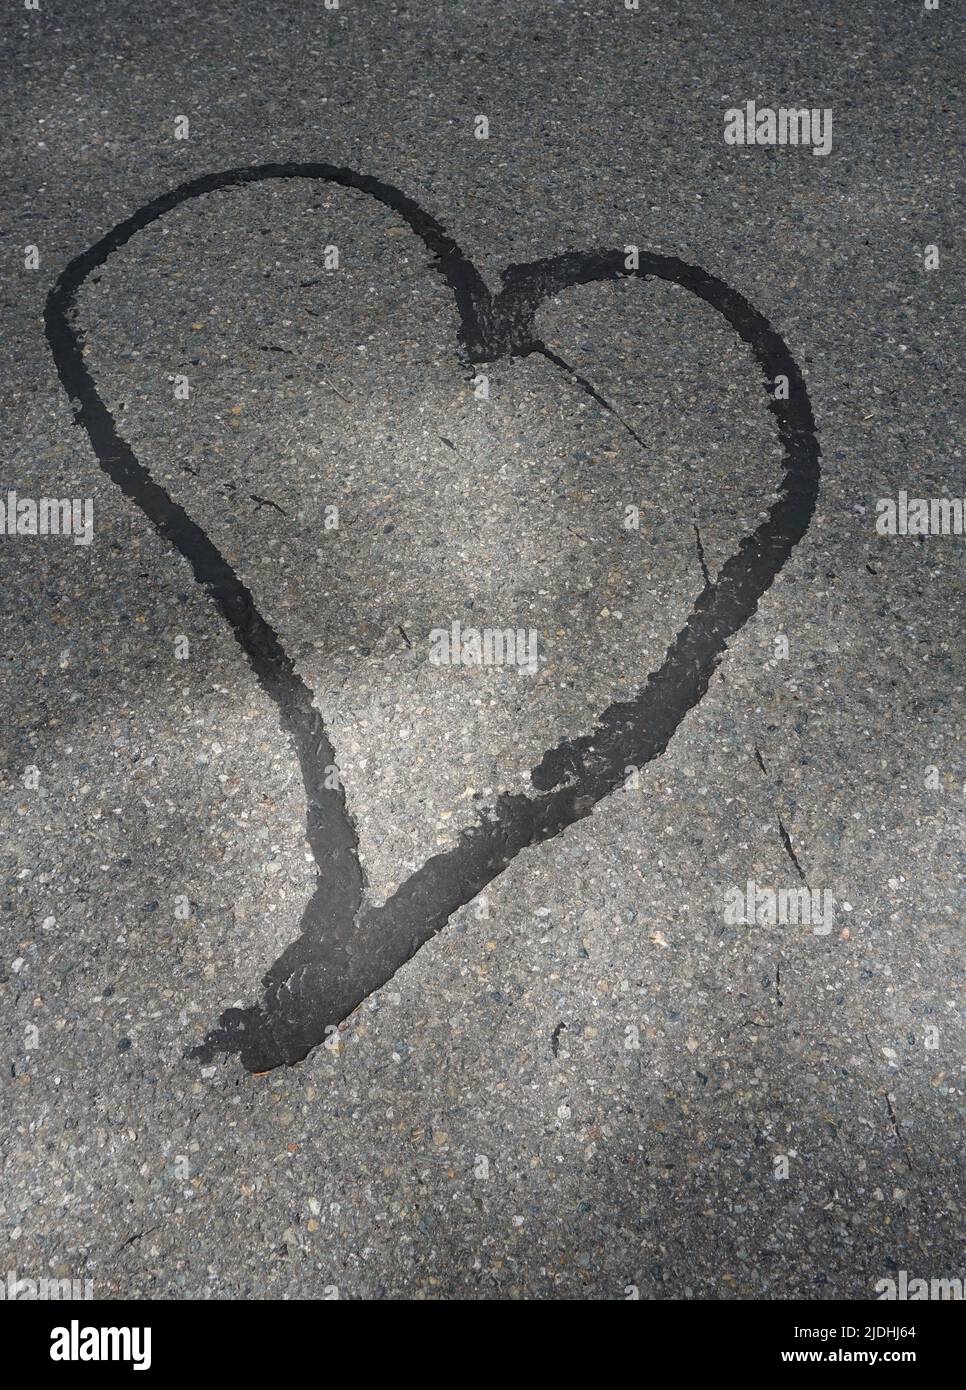 A heart painted on a pavement Stock Photo